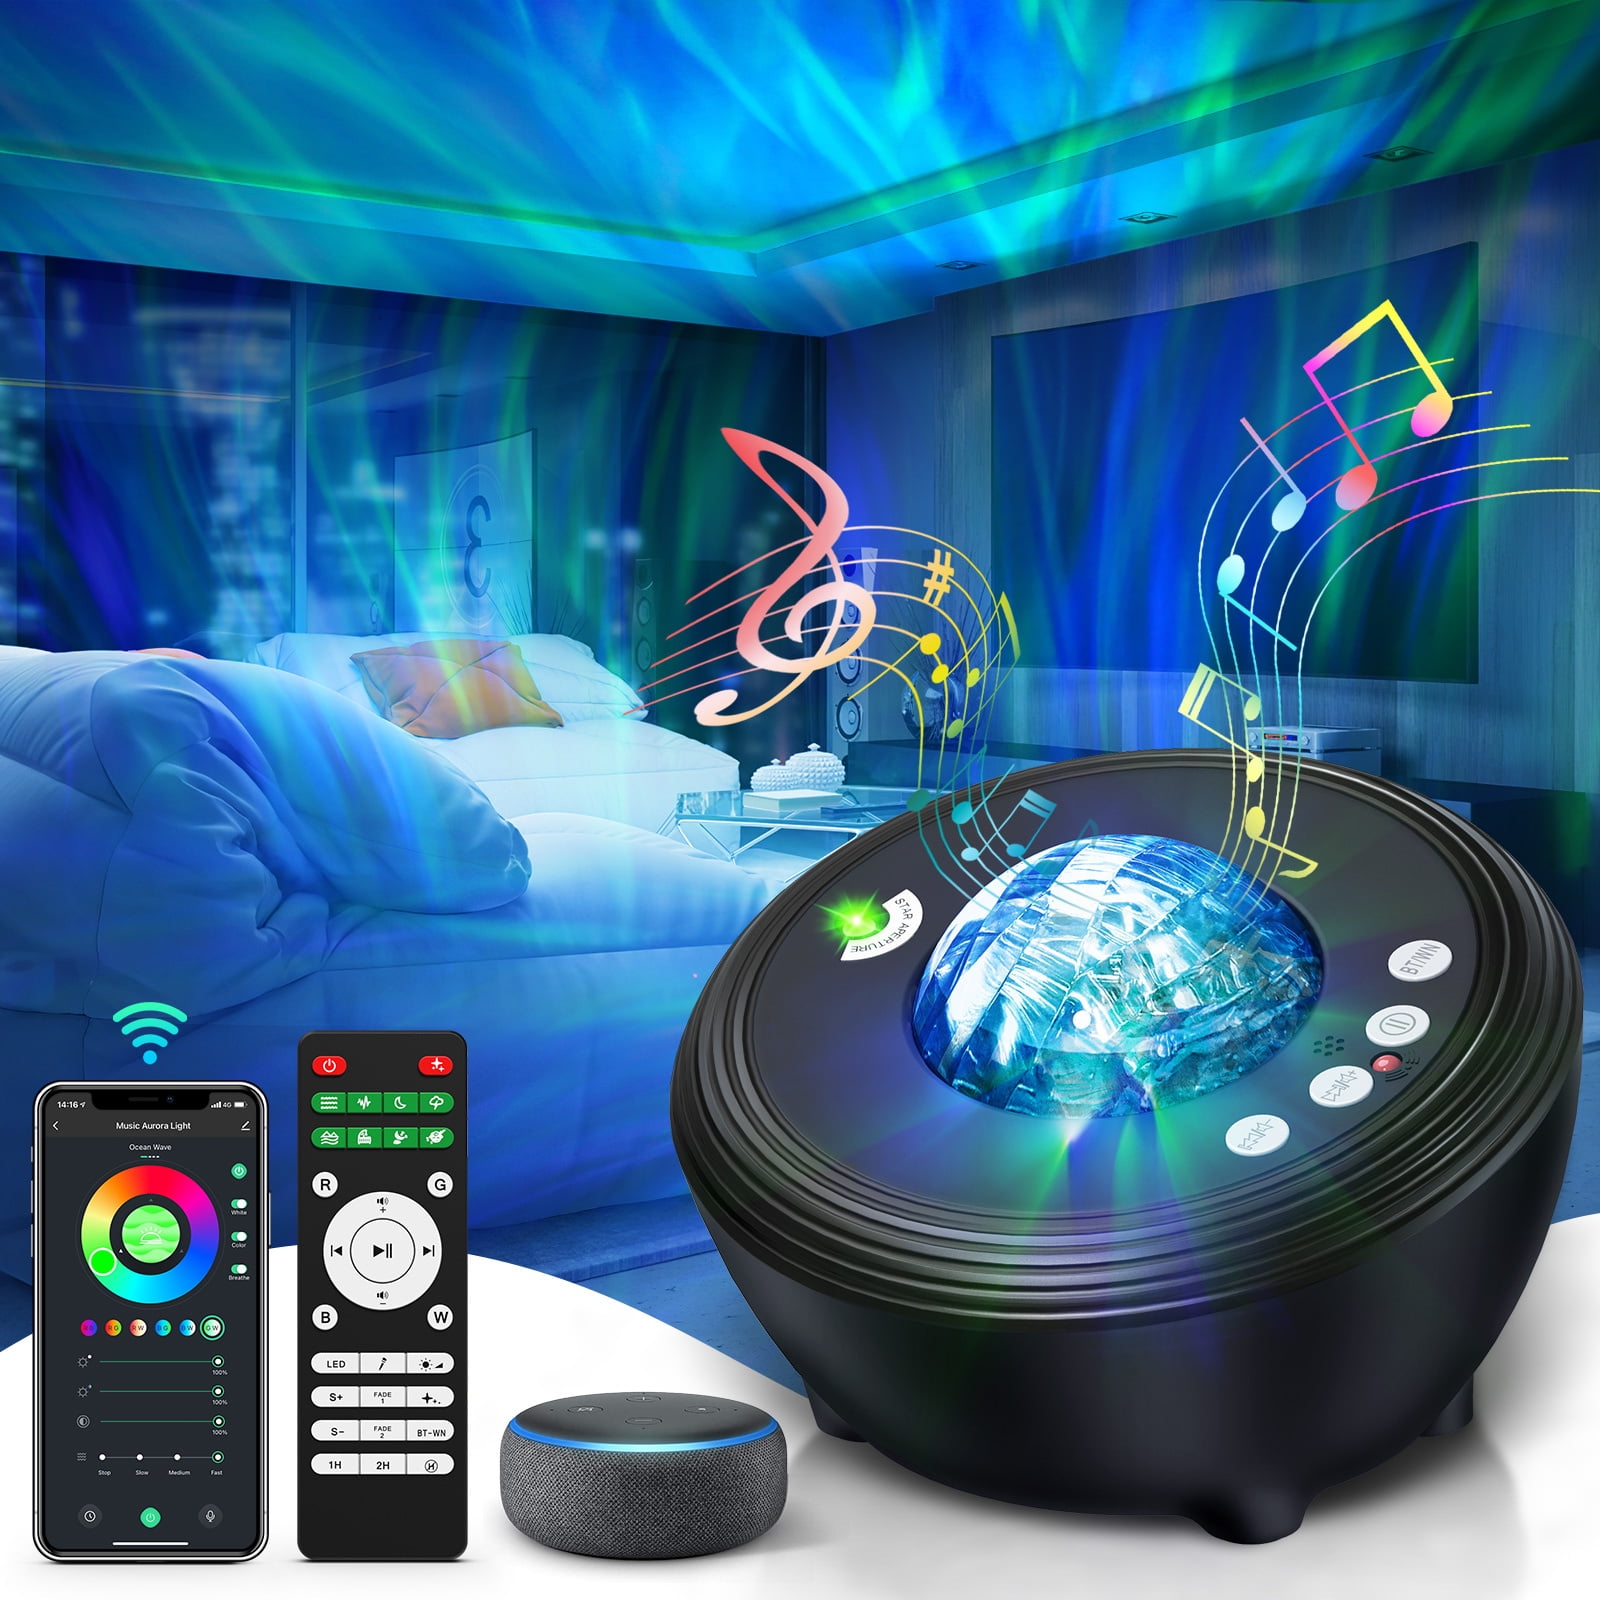 Aurora Projector,Northern Lights Star Projector Bluetooth  Speaker/Timer/Remote,White Noise Night Light Galaxy Projector Works with  Alexa & Smart App